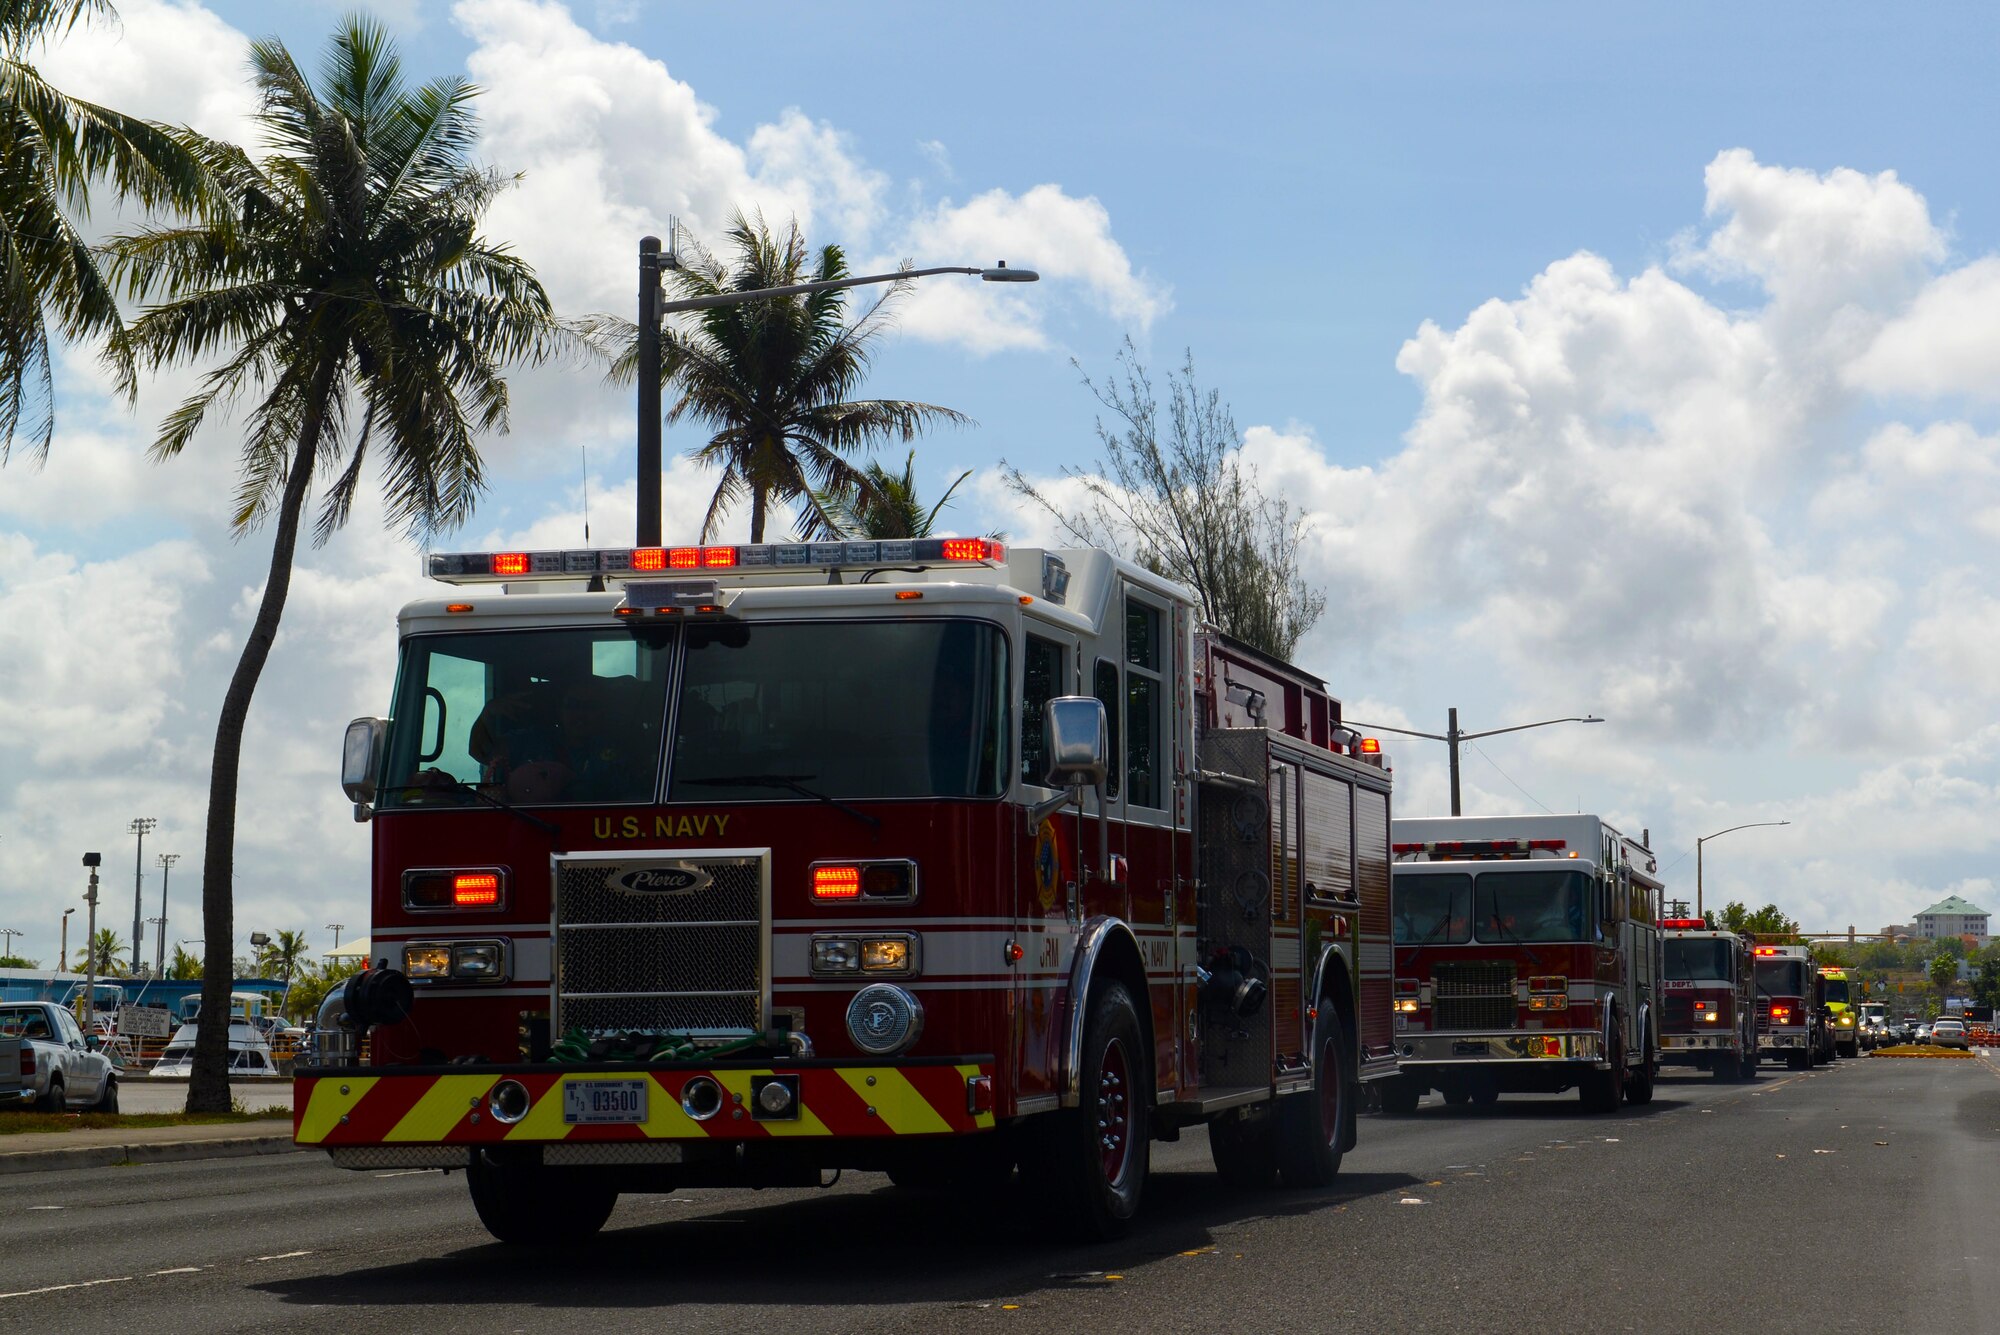 Emergency response teams participate in a parade of lights and sirens through Hagåtña and Adelup, Guam, May 16, 2016. The parade commemorated a proclamation signing, which recognized the week of May 15-21 as Emergency Medical Services Week.  (U.S. Air Force photo by Airman 1st Class Alexa Ann Henderson)
